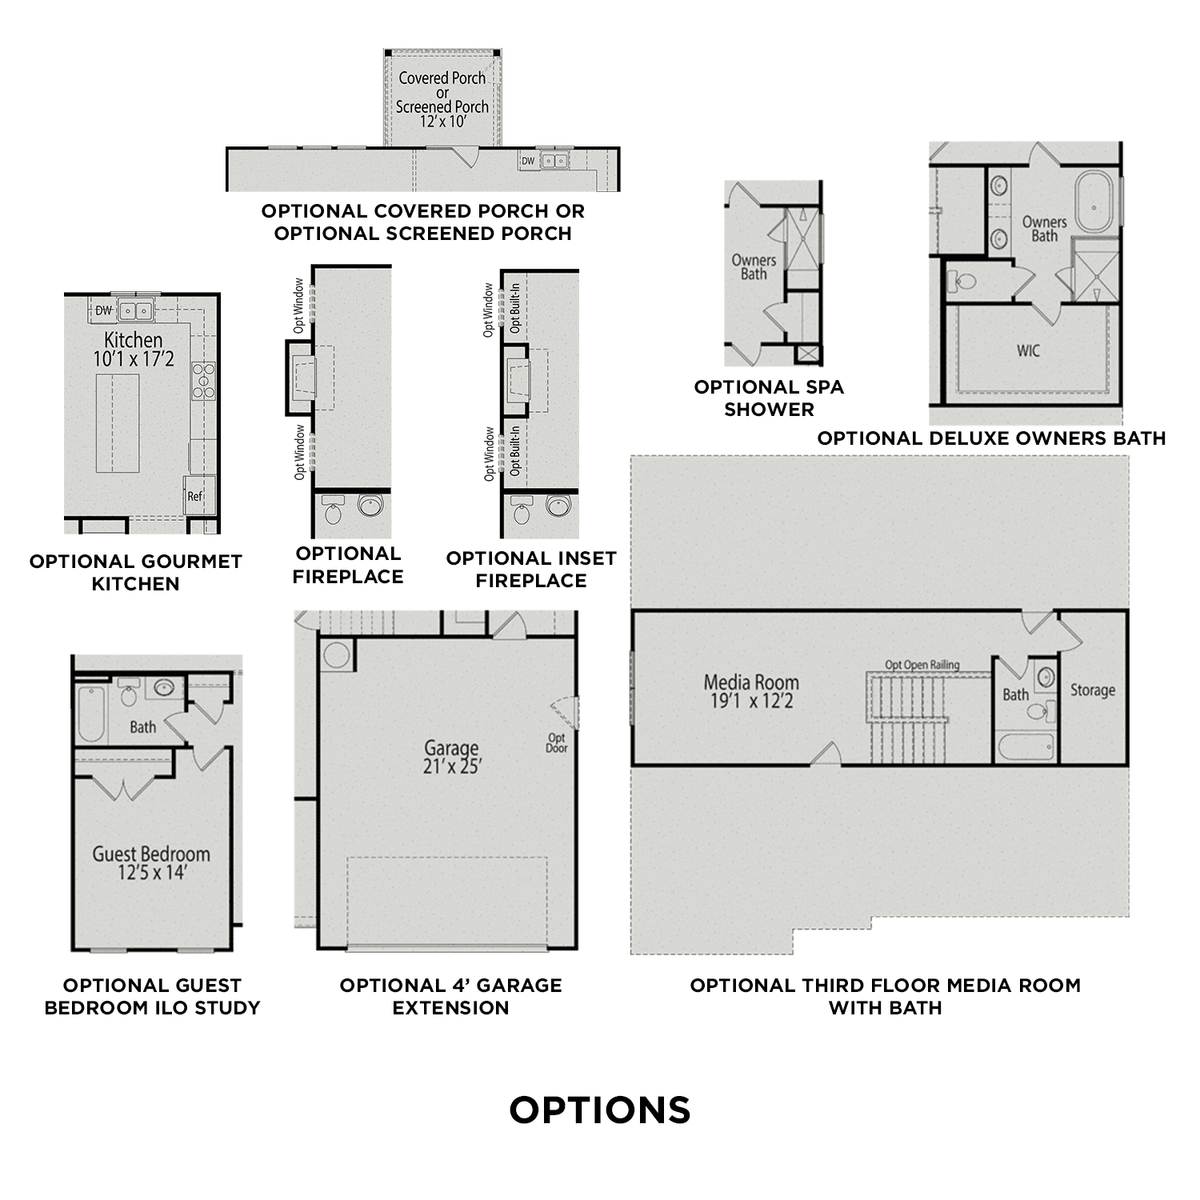 3 - The Hickory F floor plan layout for 649 Craftsman Ridge Trail in Davidson Homes' Glenmere community.